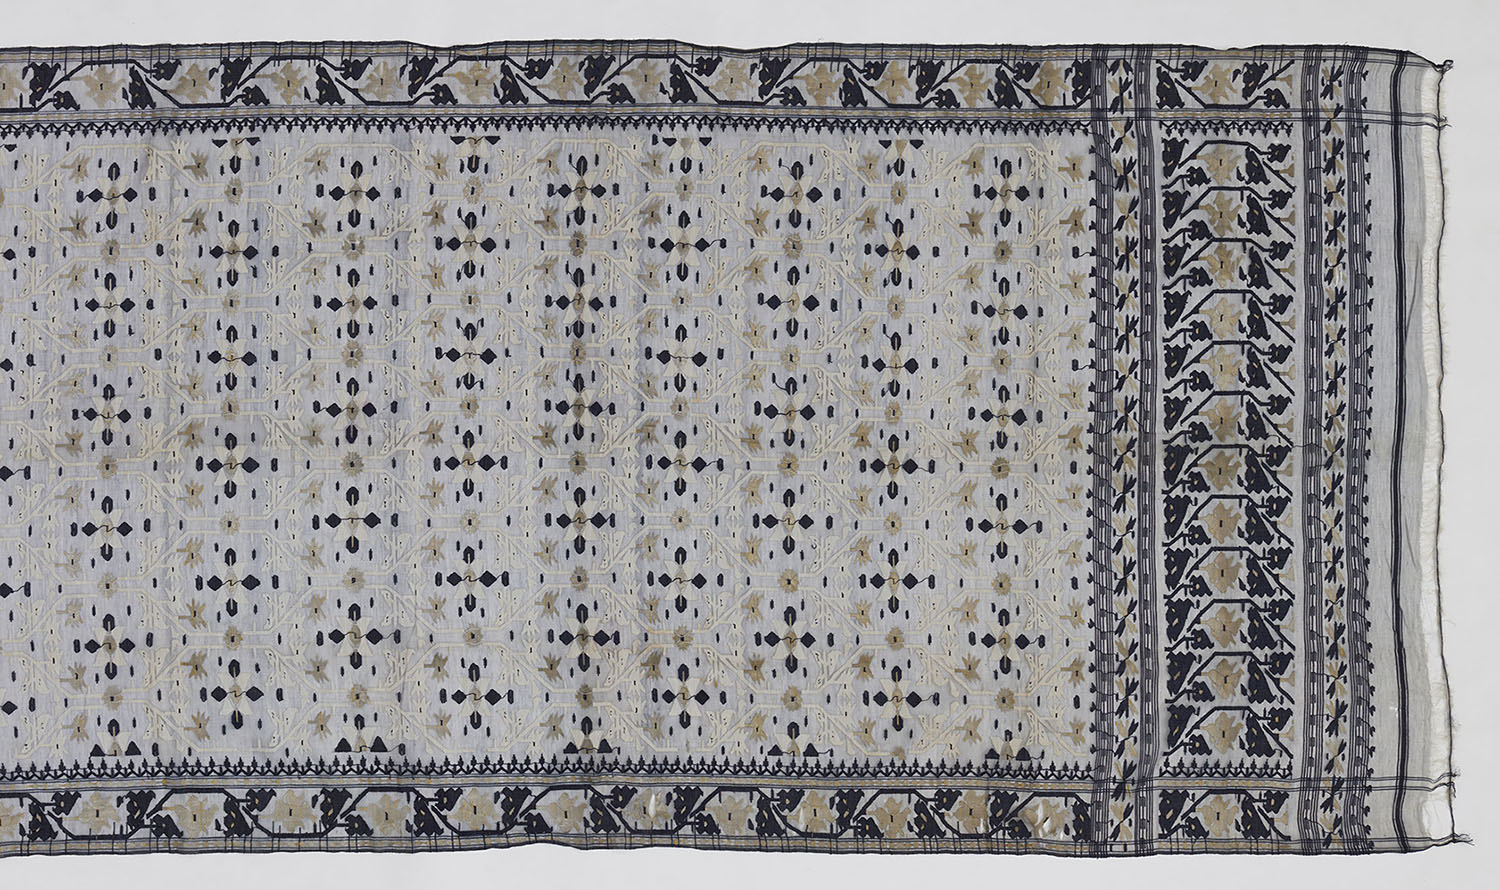 A Jamdani saree with floral motifs in diamond-shaped cells in the centre, and a dense border of similar motifs.